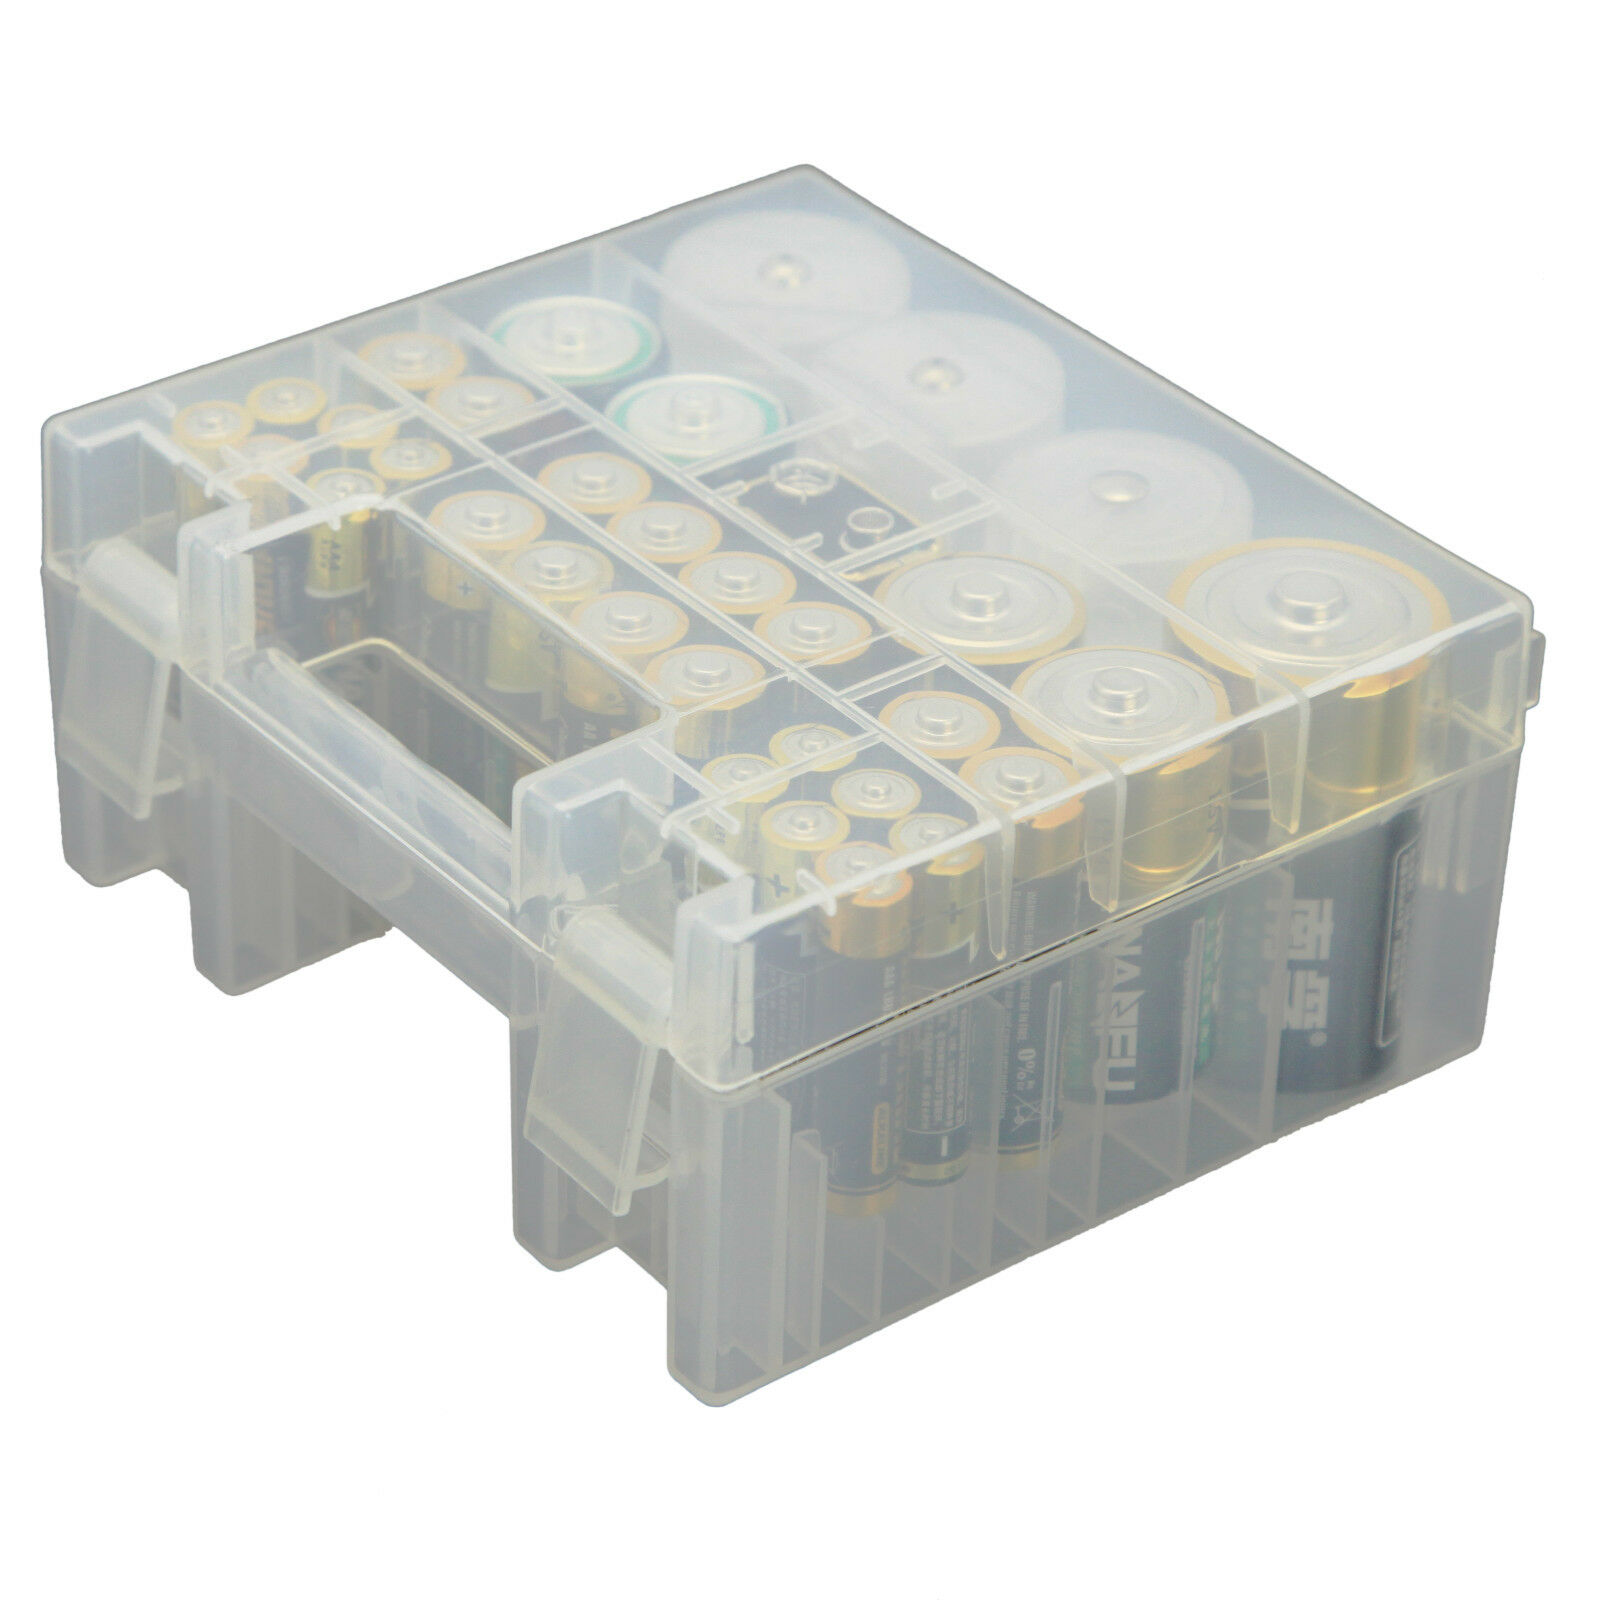 Aa Aaa C D 9v Battery Storage Box Case Holder Container Organizer Clear Plastic